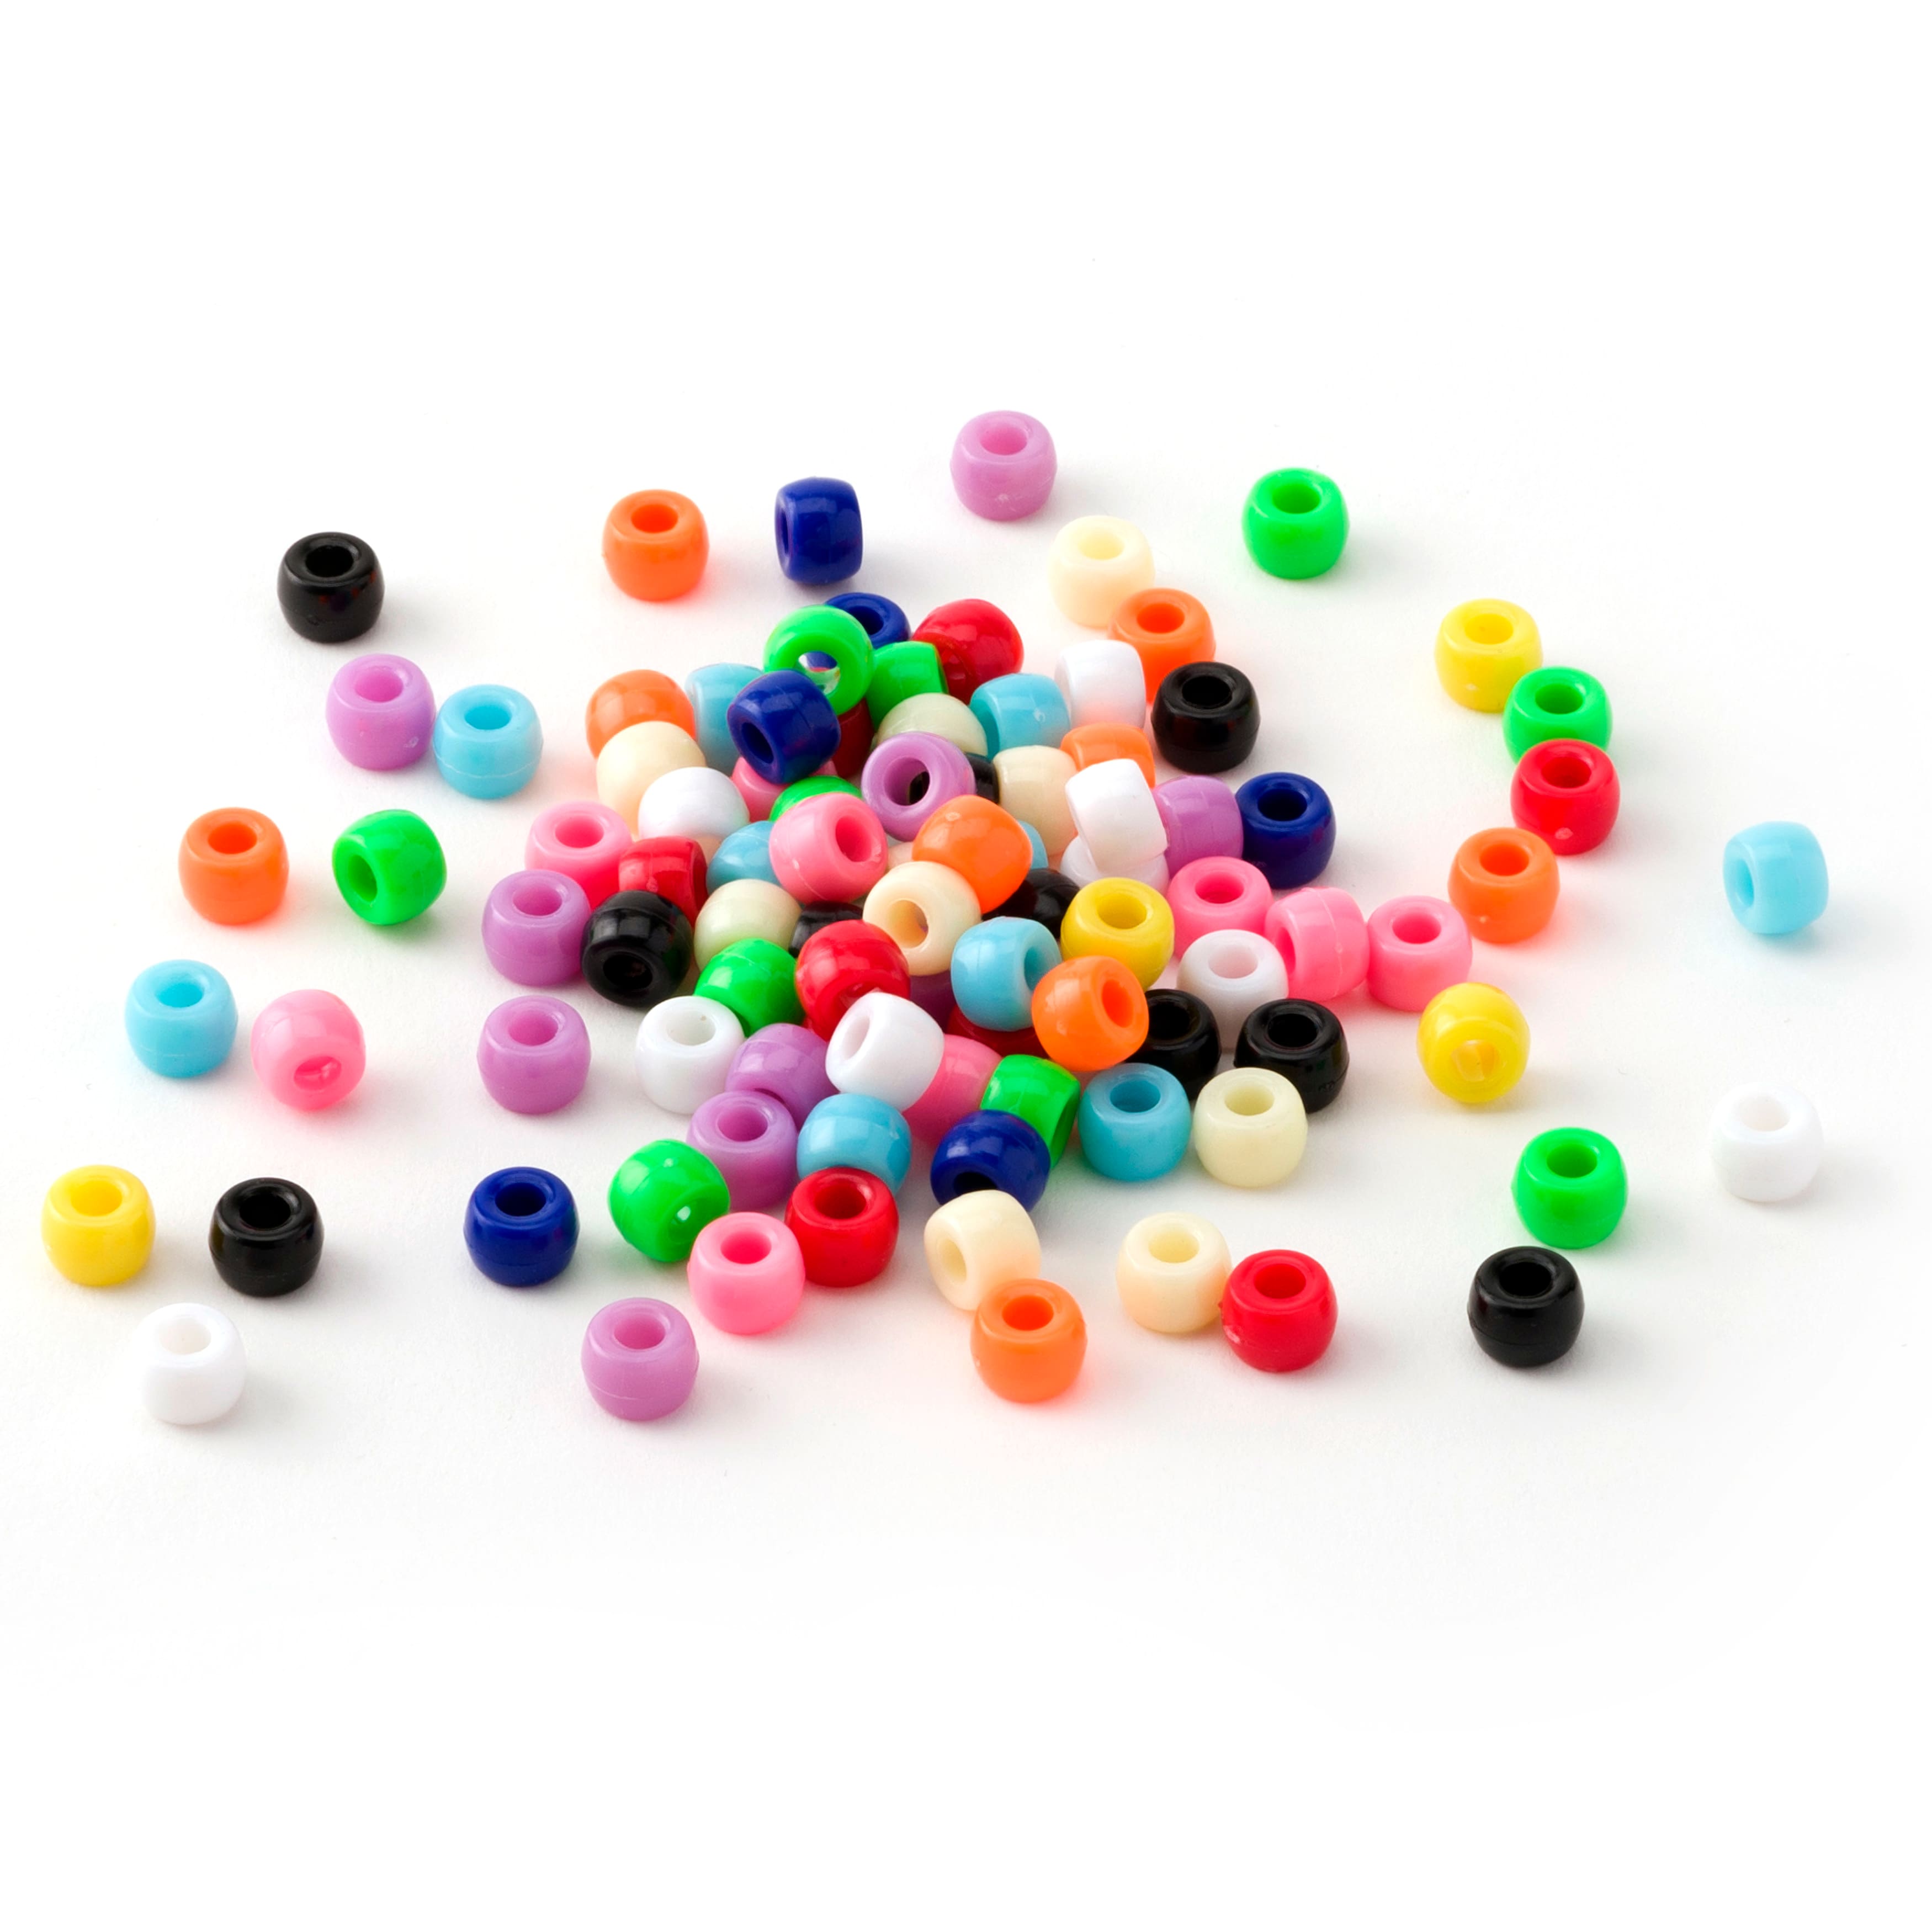 12 Packs: 280 ct. (3,360 total) Color Change Clear Pony Beads by